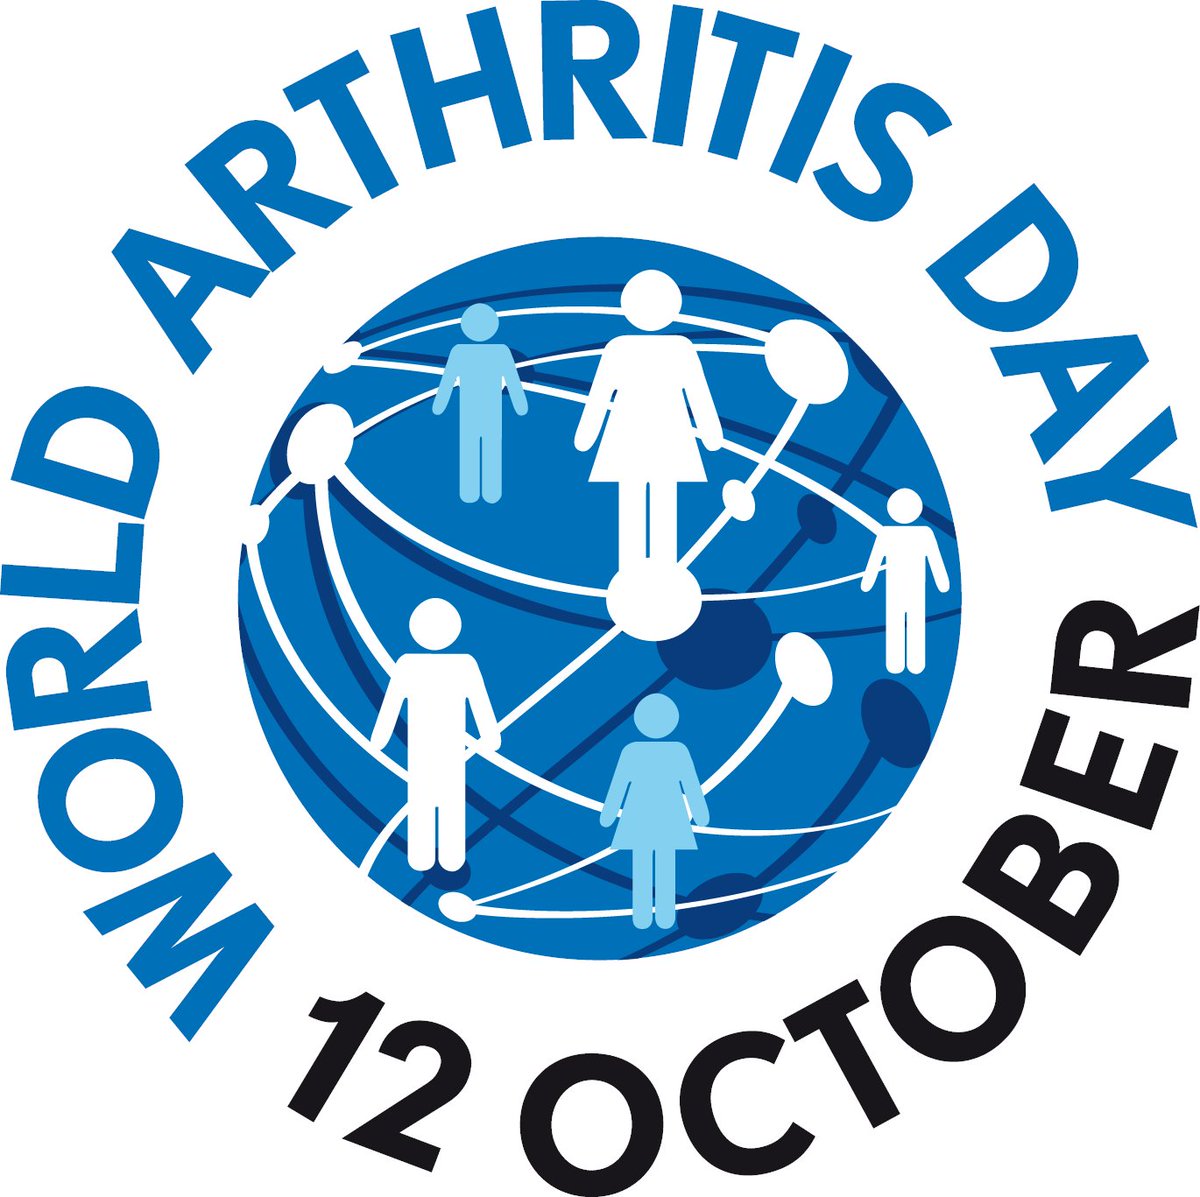 Rheumatic and Musculoskeletal Diseases (RMDs) comprise over 200 conditions. RMDs can affect people at any age. RMDs can result in developing comorbidities such as cancer, cardiovascular diseases and diabetes #WAD2023 #WorldArthritisDay #EULAR